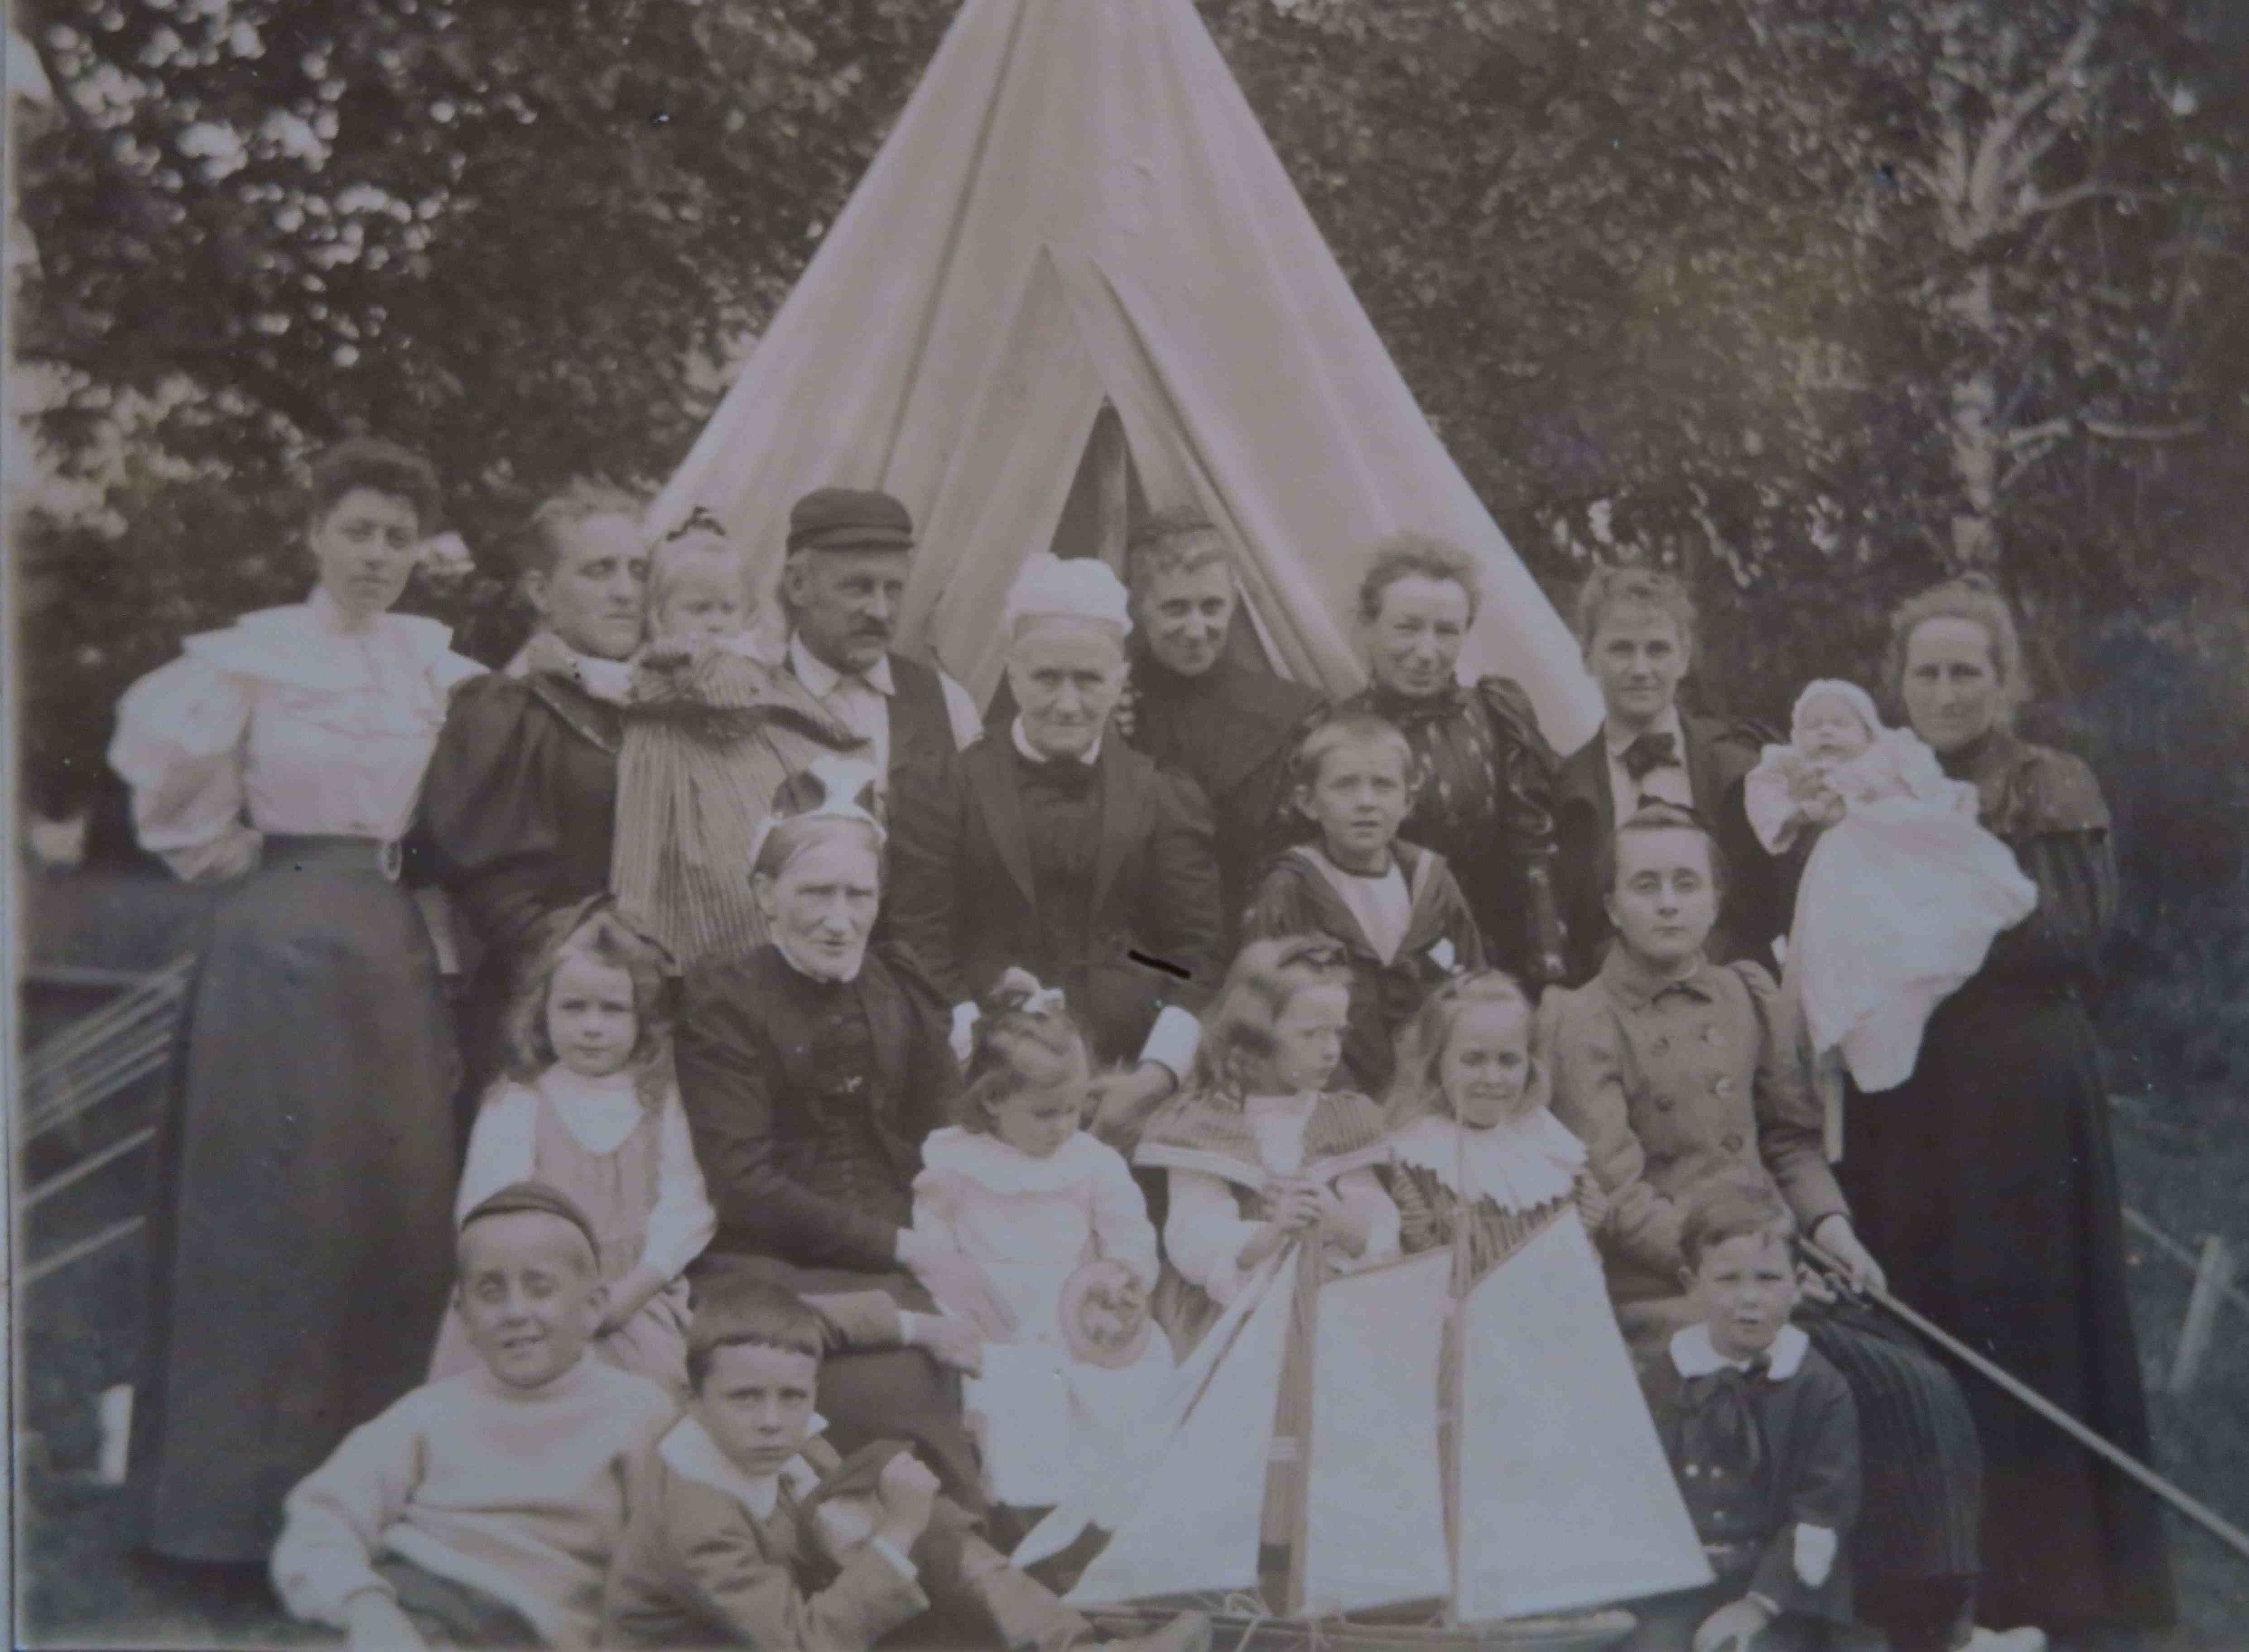 A black-and-white photo portrait of some twenty people of all ages in front of a tent.